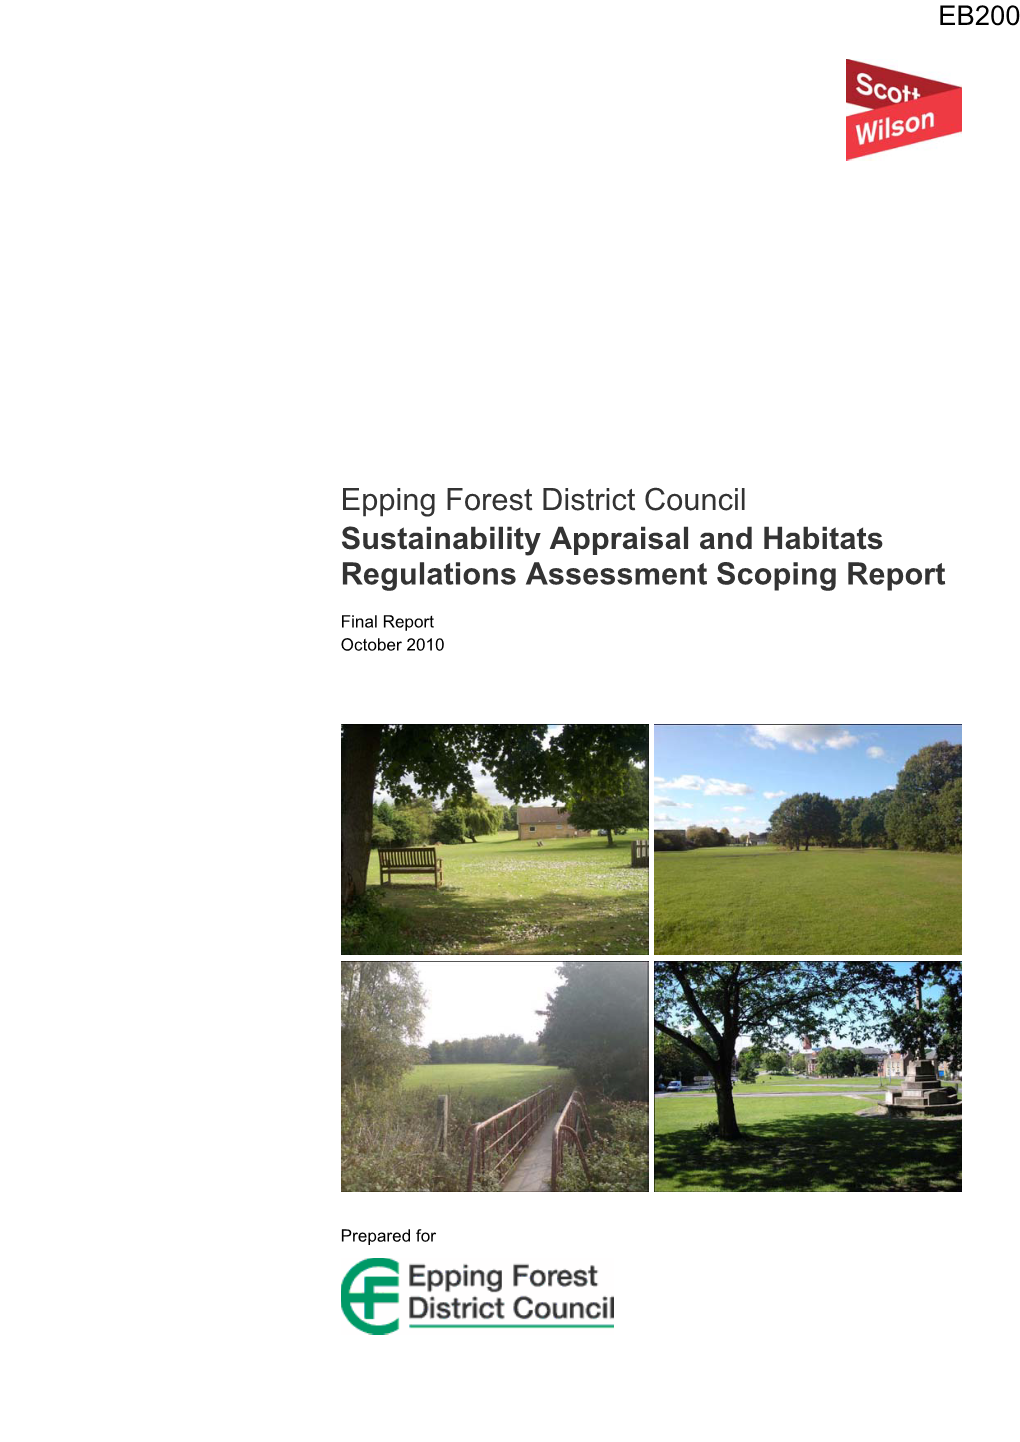 Epping Forest District Council Sustainability Appraisal and Habitats Regulations Assessment Scoping Report